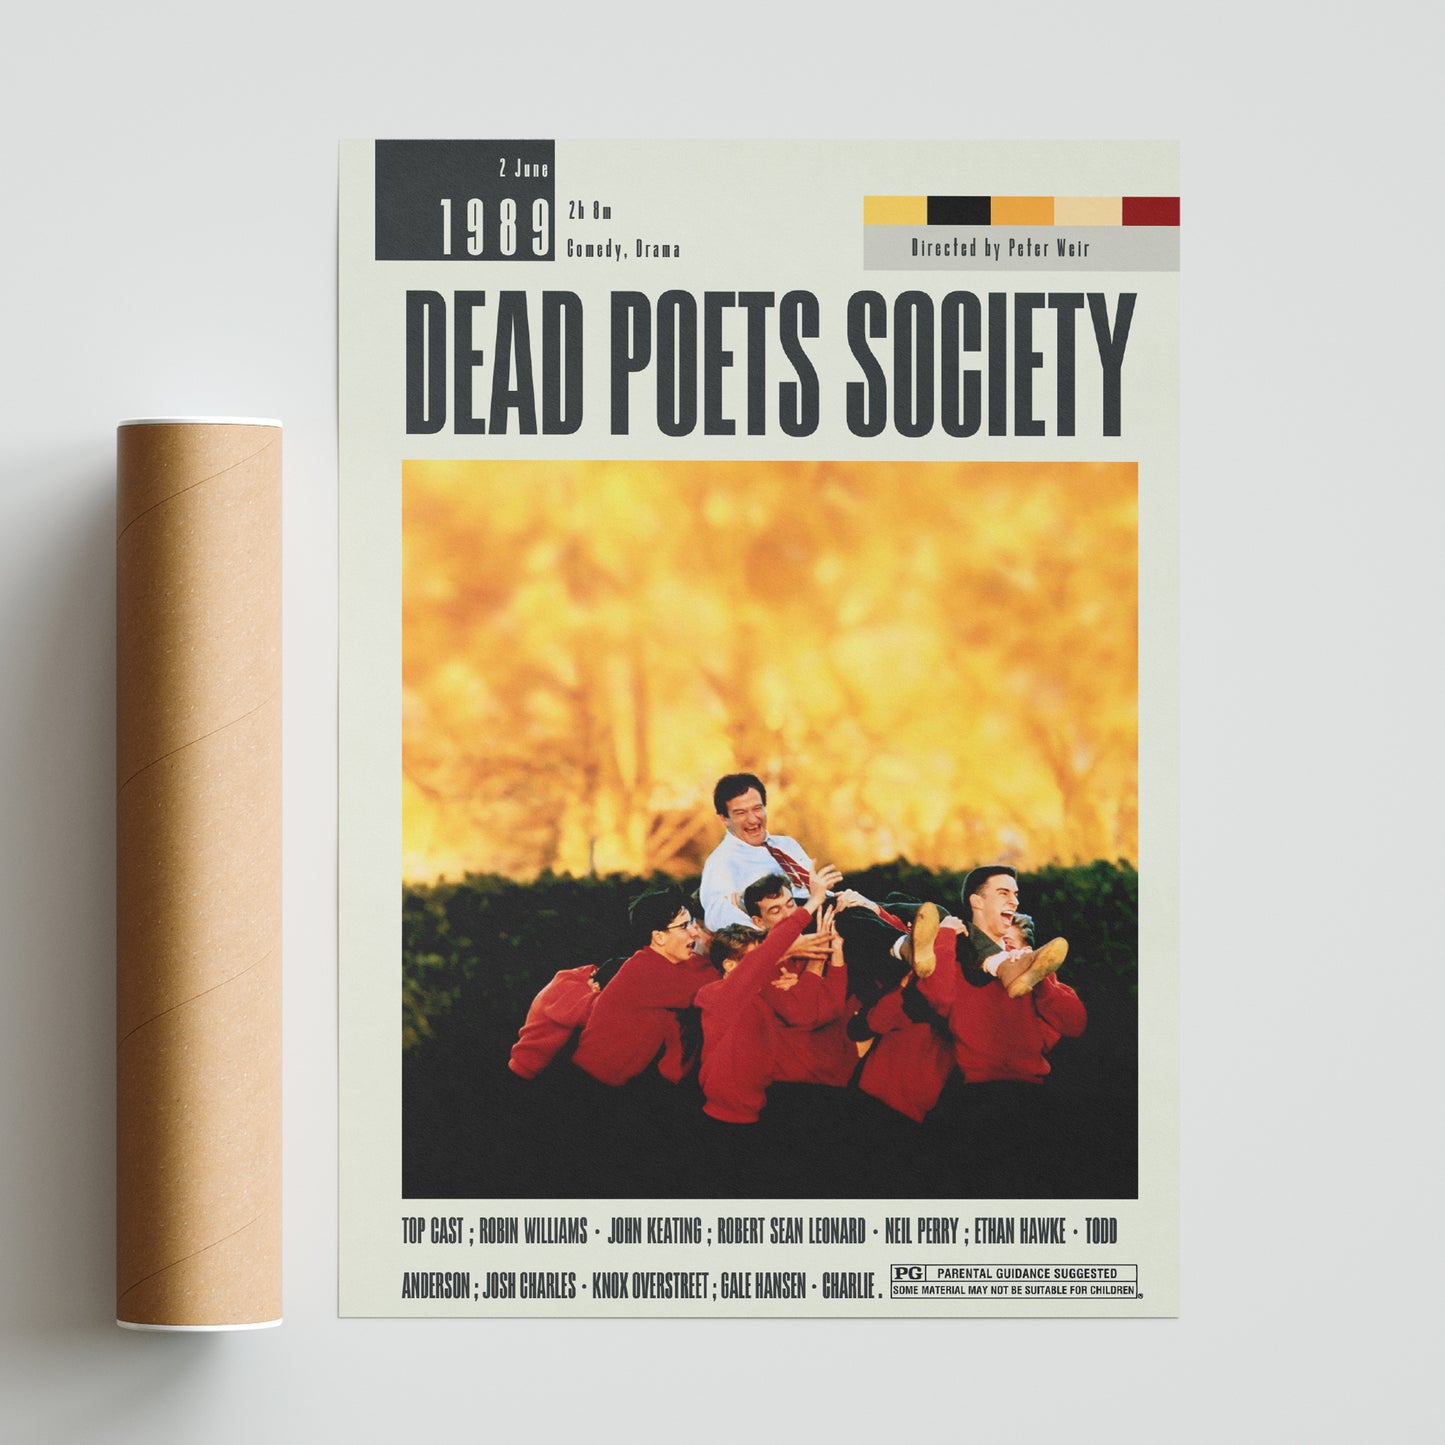 Experience the best of cinema with Dead Poets Society from renowned director Peter Weir. This collection features 98 custom and minimalist movie posters in vintage retro art print, perfect for wall art decor. Relive the best moments with top cast members, and choose from a range of sizes.